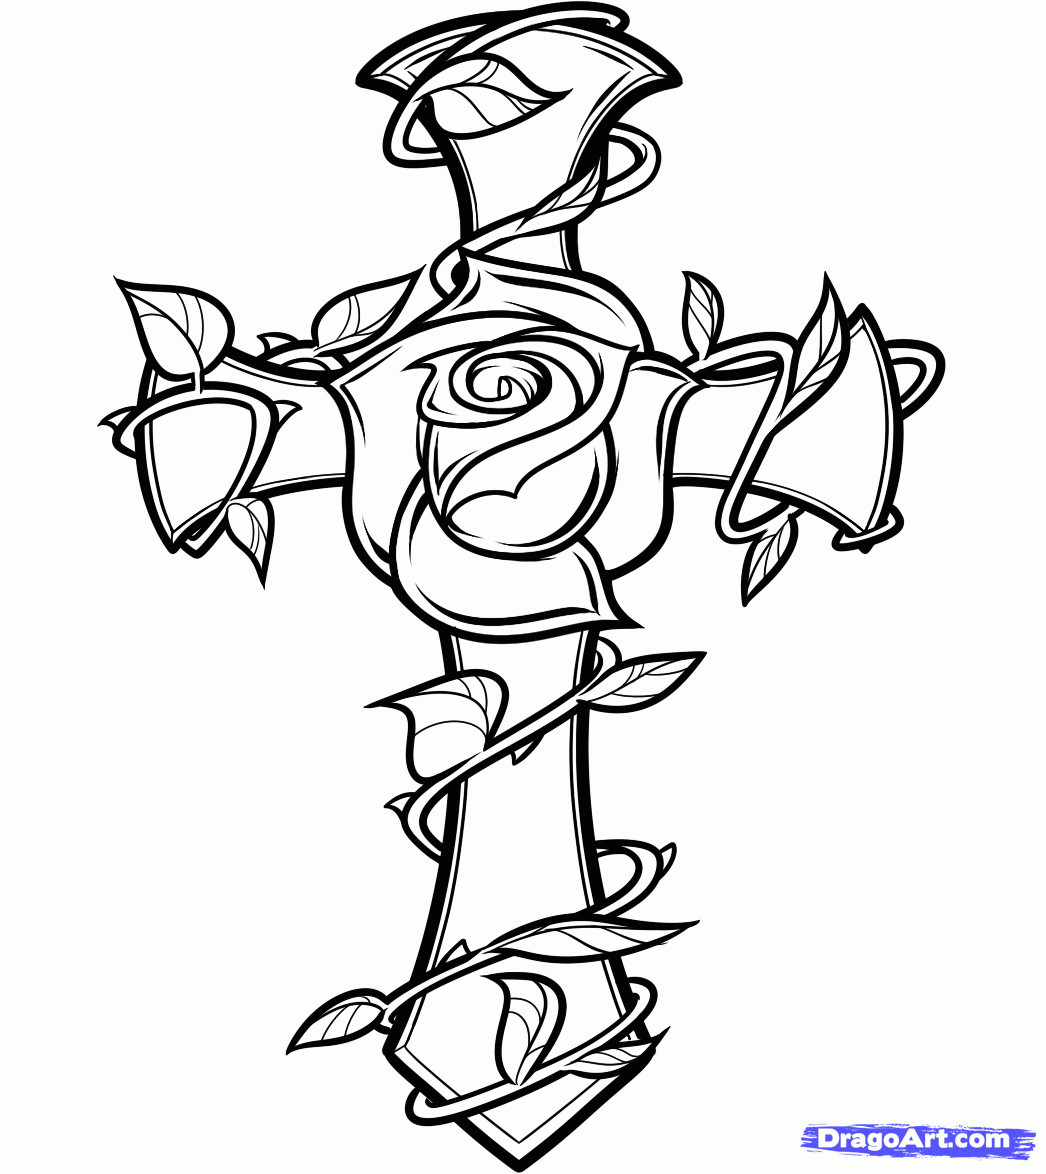 Tattoo Coloring Pages Printable
 How to Draw a Rose and Cross Tattoo Step by Step Tattoos